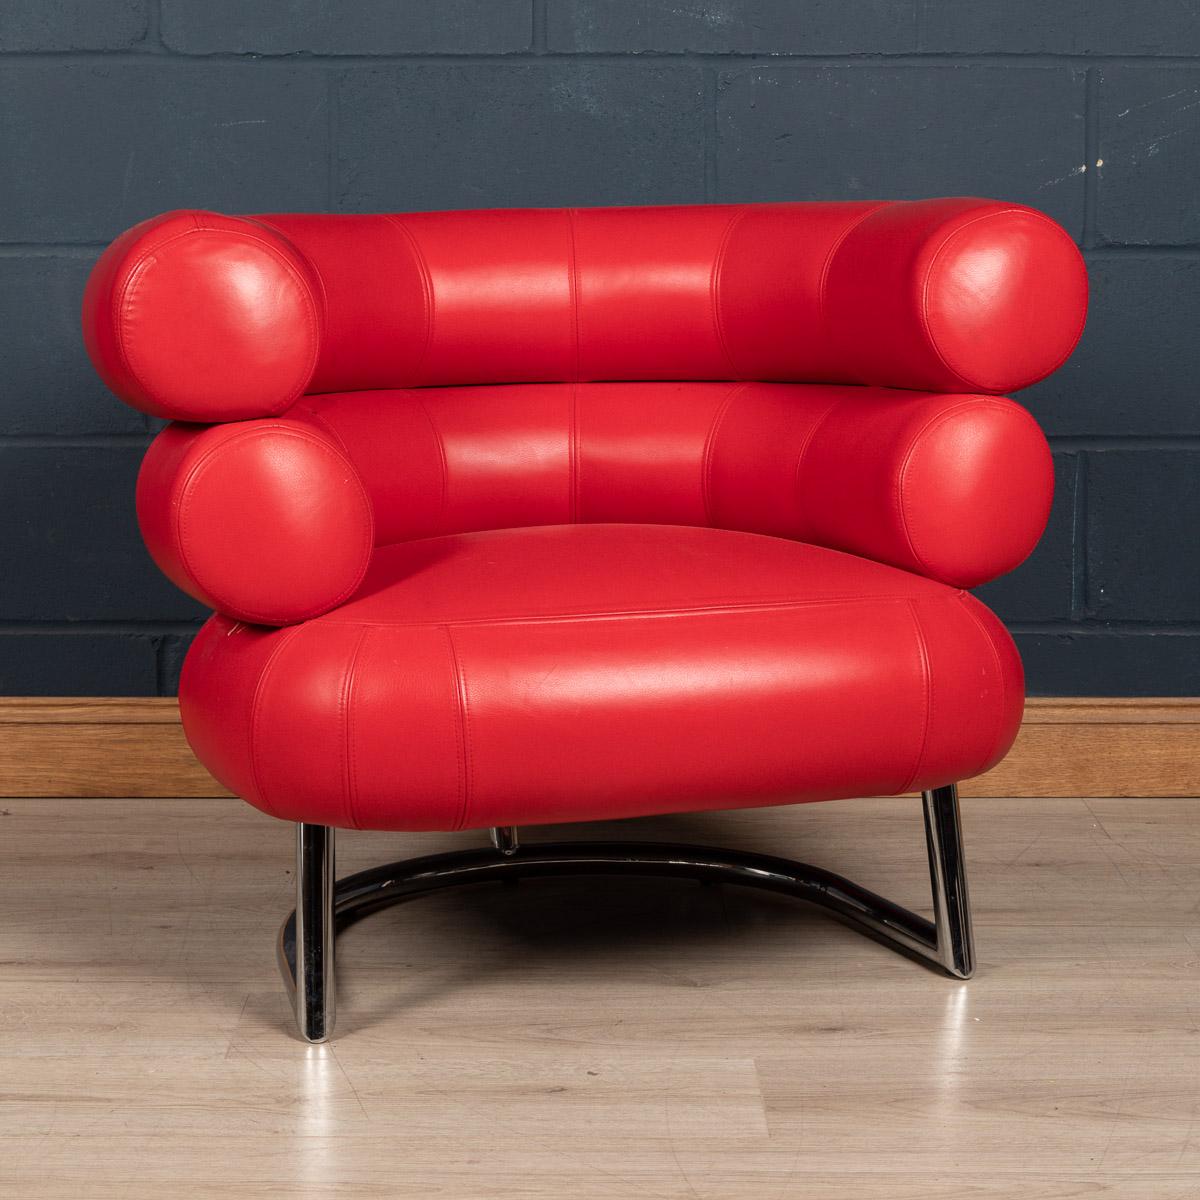 The Bibendum chair inspired by Eileen Gray is one of the most iconic pieces, created over 100 years ago. This stylish chair would complement any space with its stylish and contemporary design.

Condition
In Good Condition - wear and tear